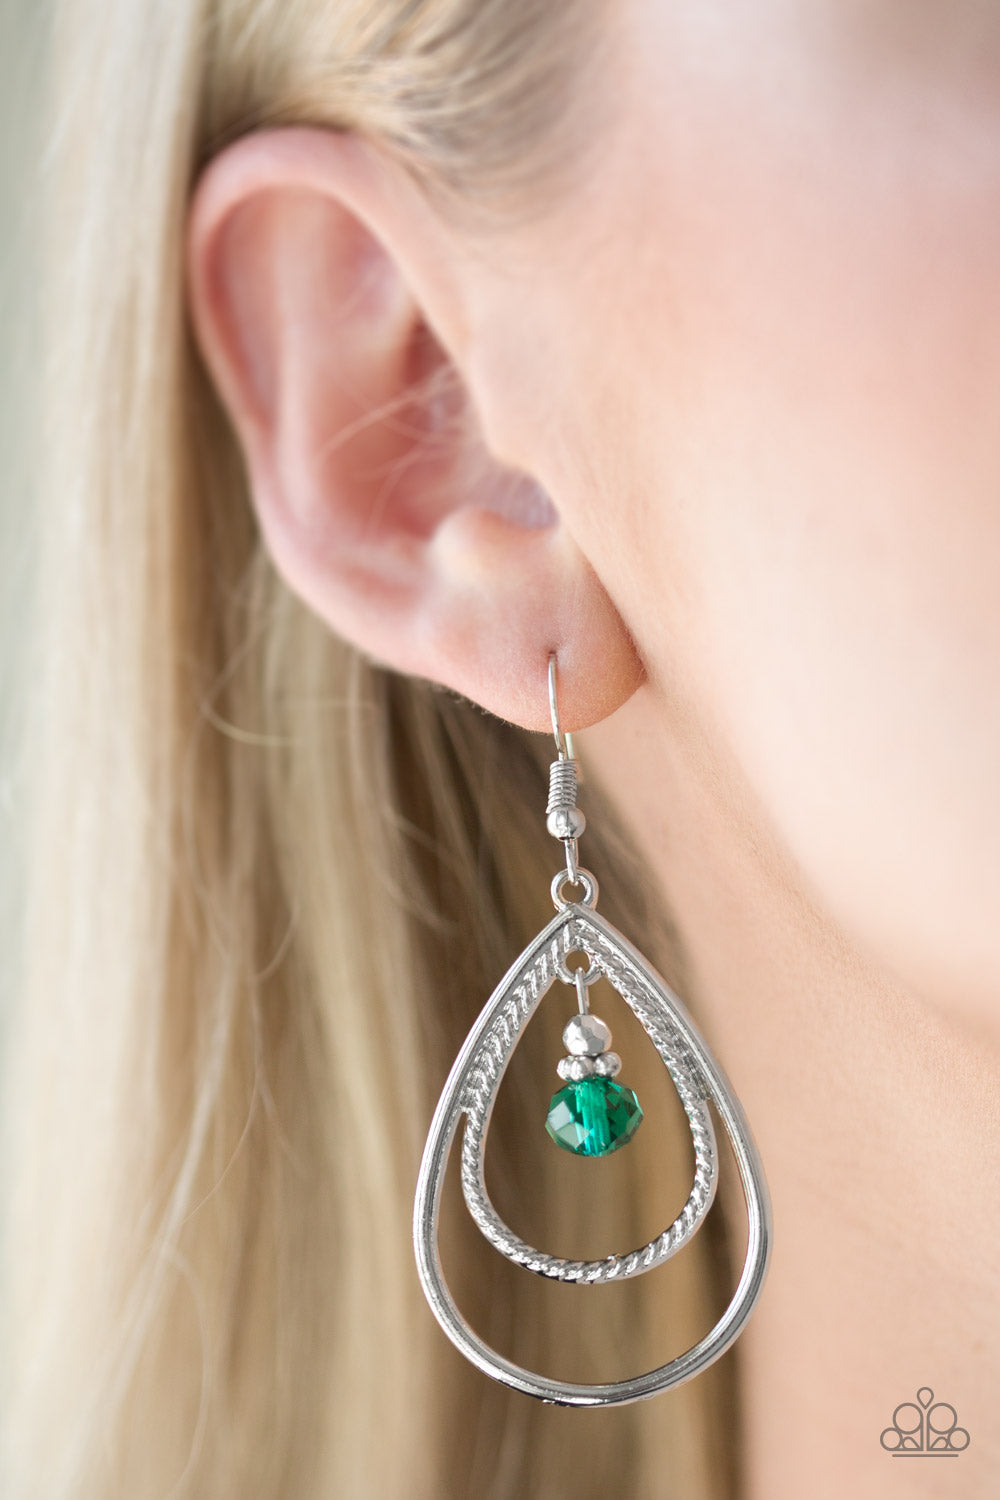 Paparazzi ♥ REIGN On My Parade - Green ♥  Earrings